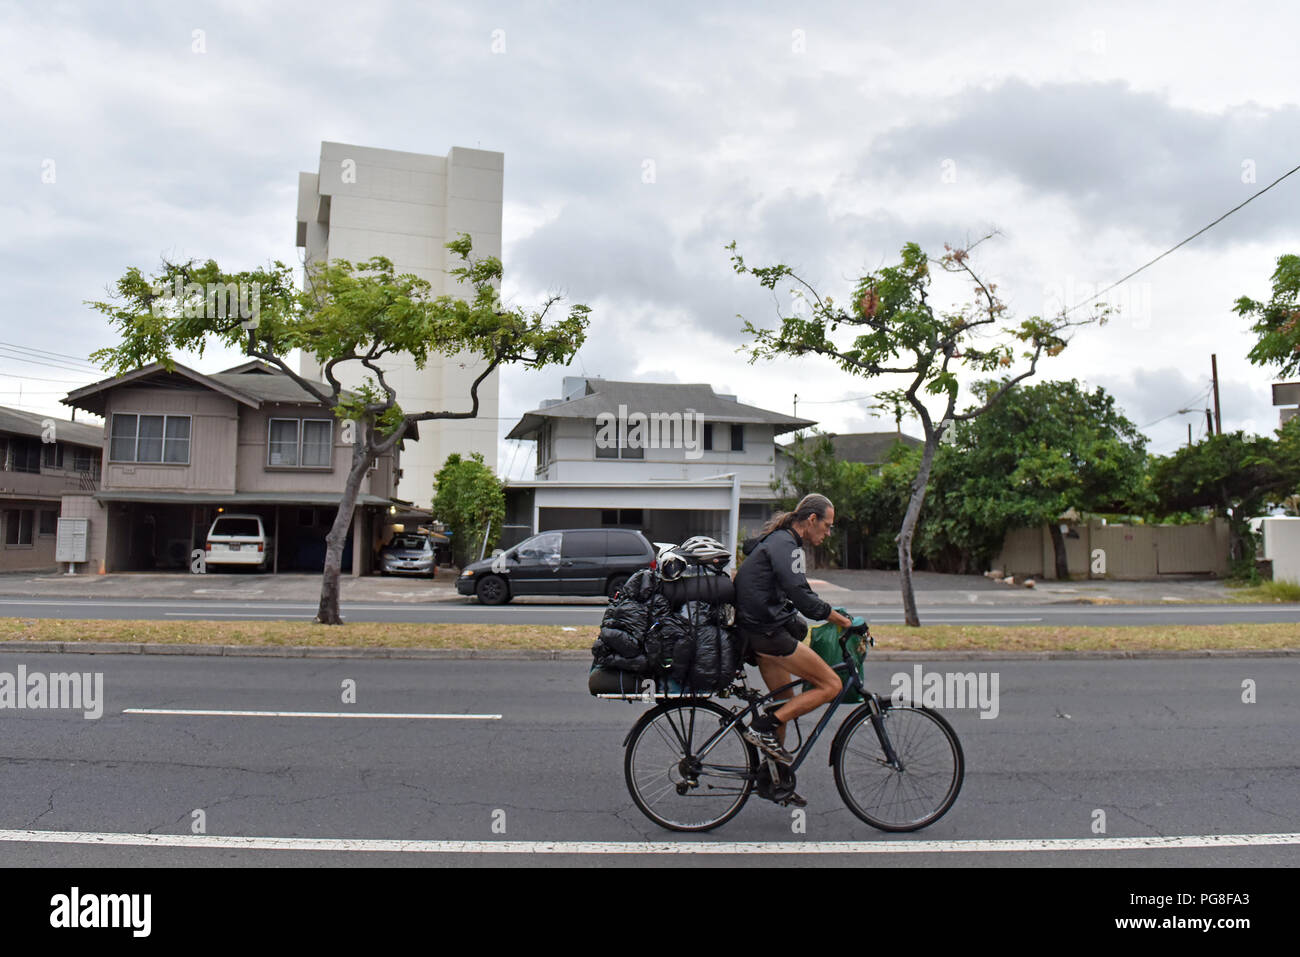 (180824) -- HONOLULU, Aug. 24, 2018 (Xinhua) -- A homeless man rides a bicycle to look for a new location to camp in Honolulu of Hawaii, the United States, Aug. 23, 2018. Hurricane Lane, predicted as the biggest weather threat to Hawaii in decades, moved perilously close to the Aloha State Thursday morning, triggering heavy rain, landslide and flooding. (Xinhua/Sun Ruibo) (dtf) Stock Photo